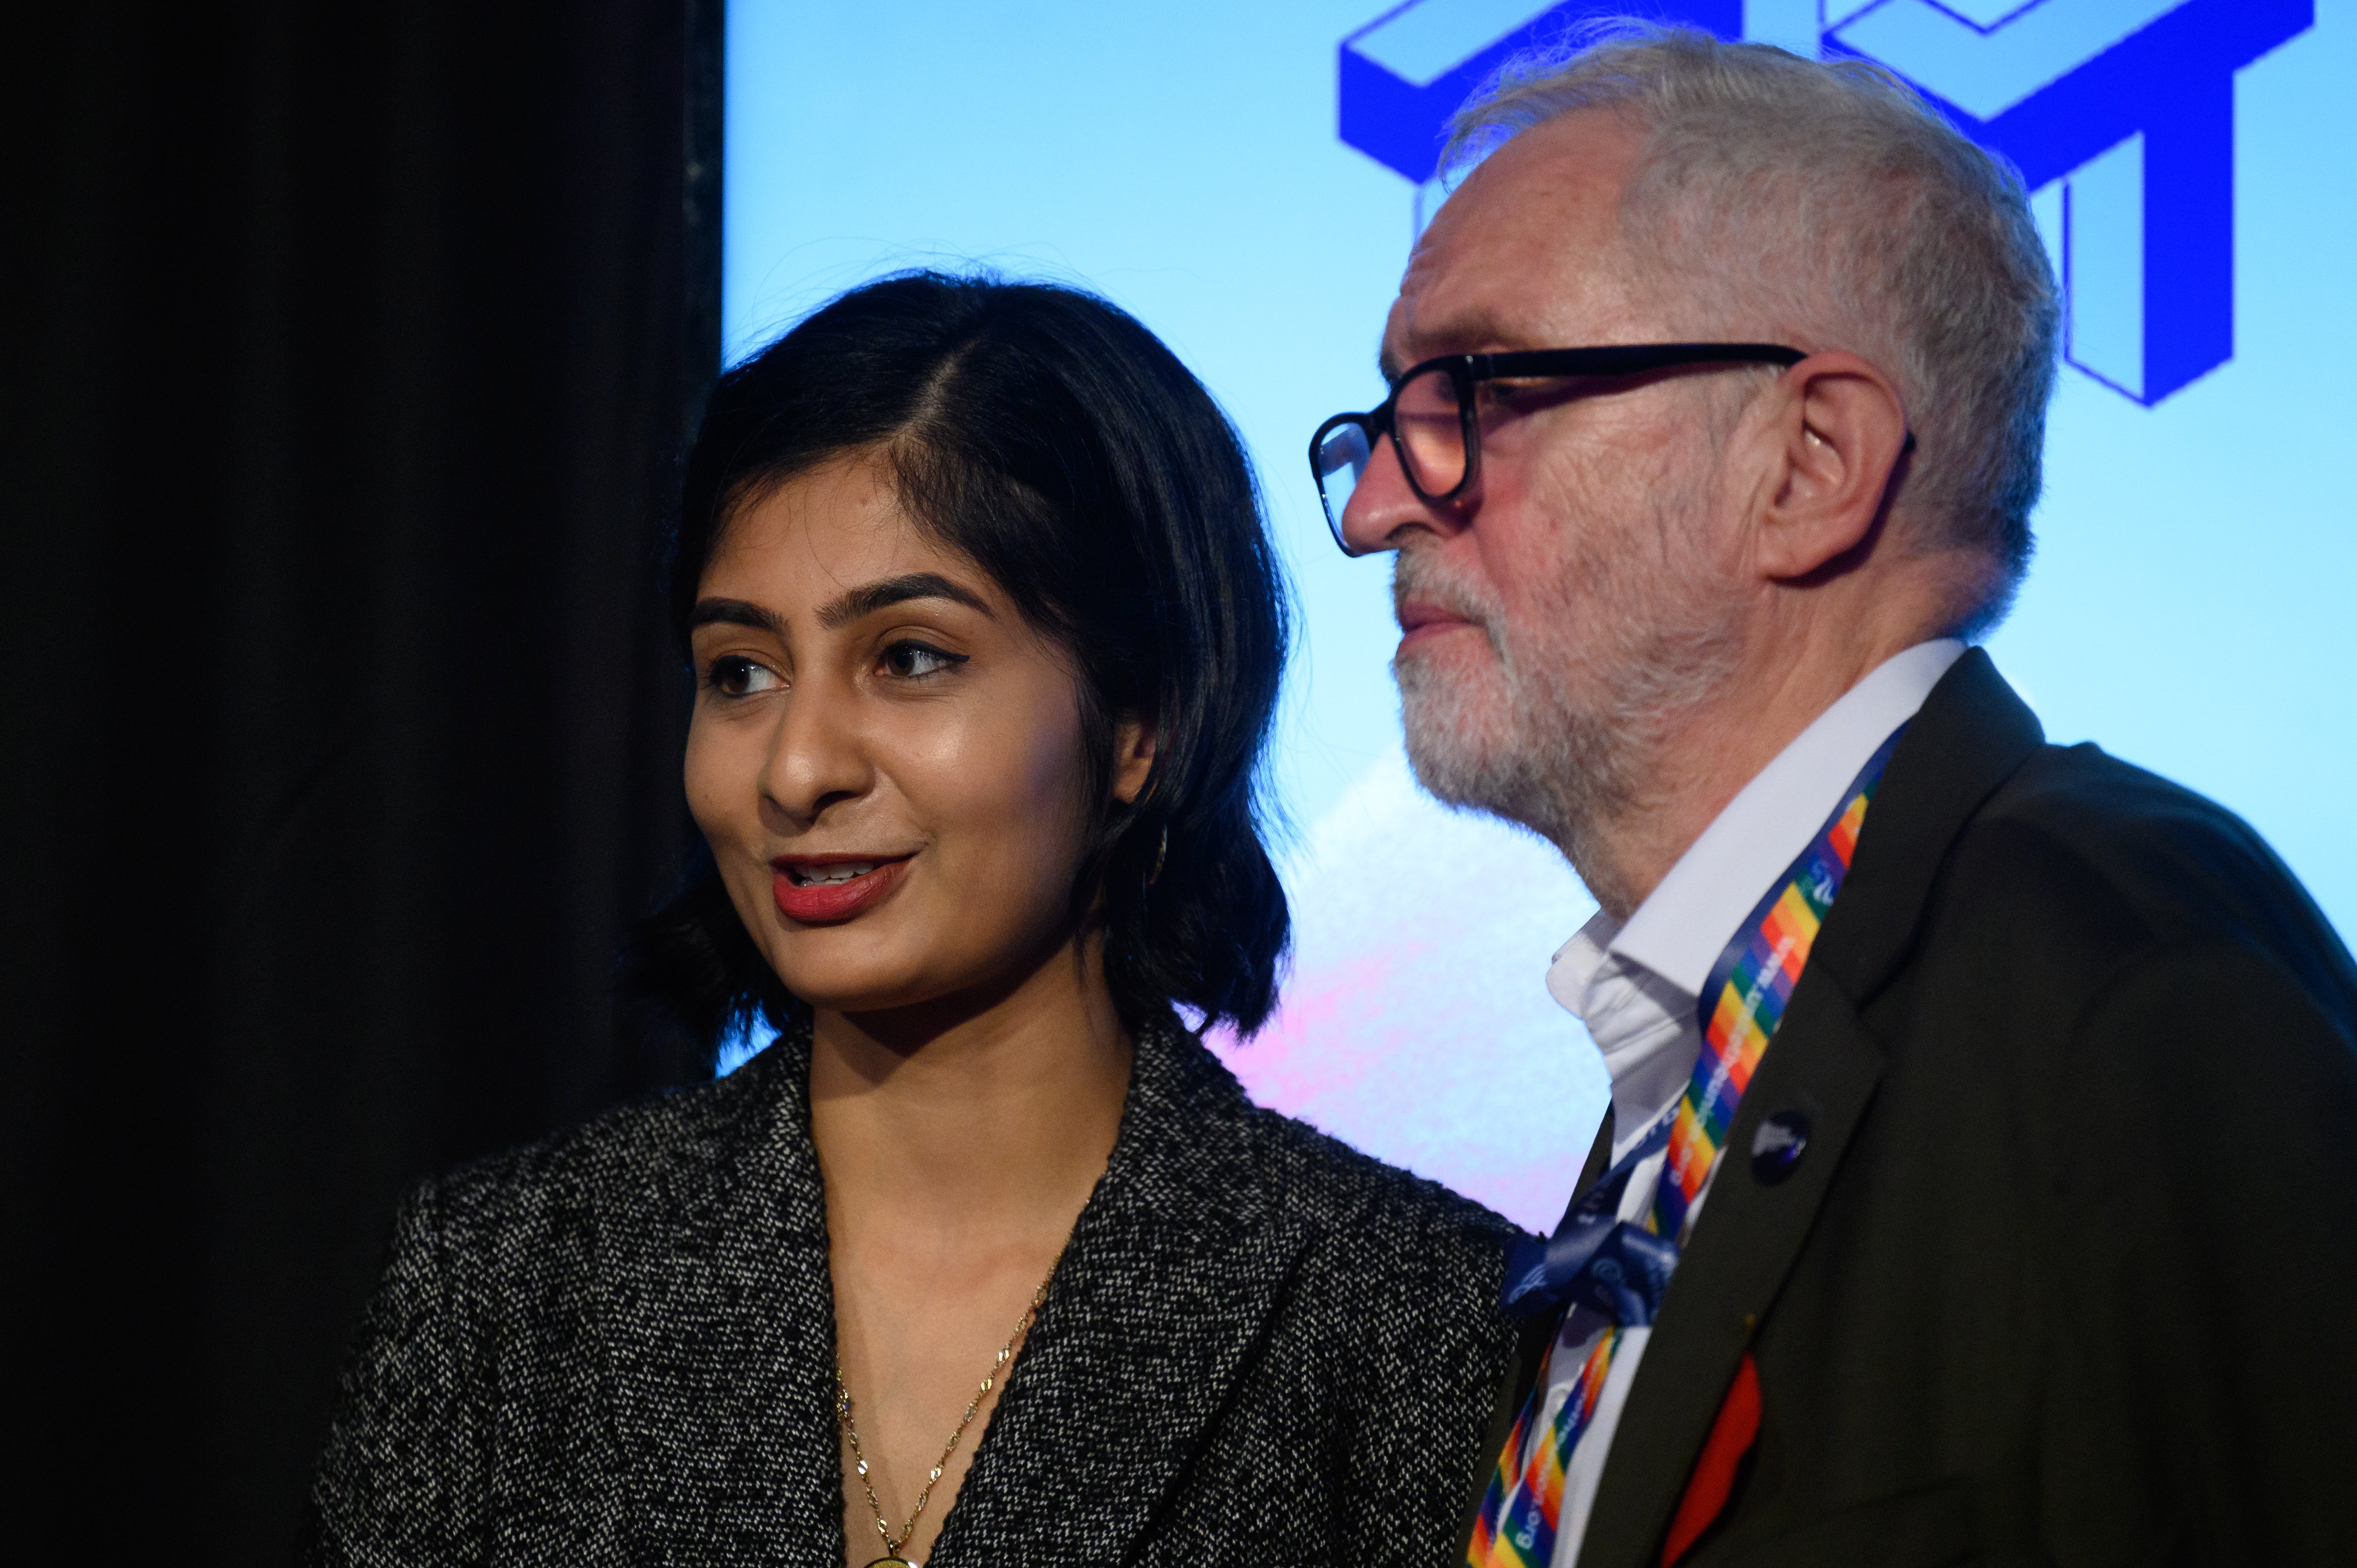 Zarah Sultana MP with Jeremy Corbyn at the 2021 Labour party conference. Both politicians were signatories to a controversial Stop the War statement on Ukraine